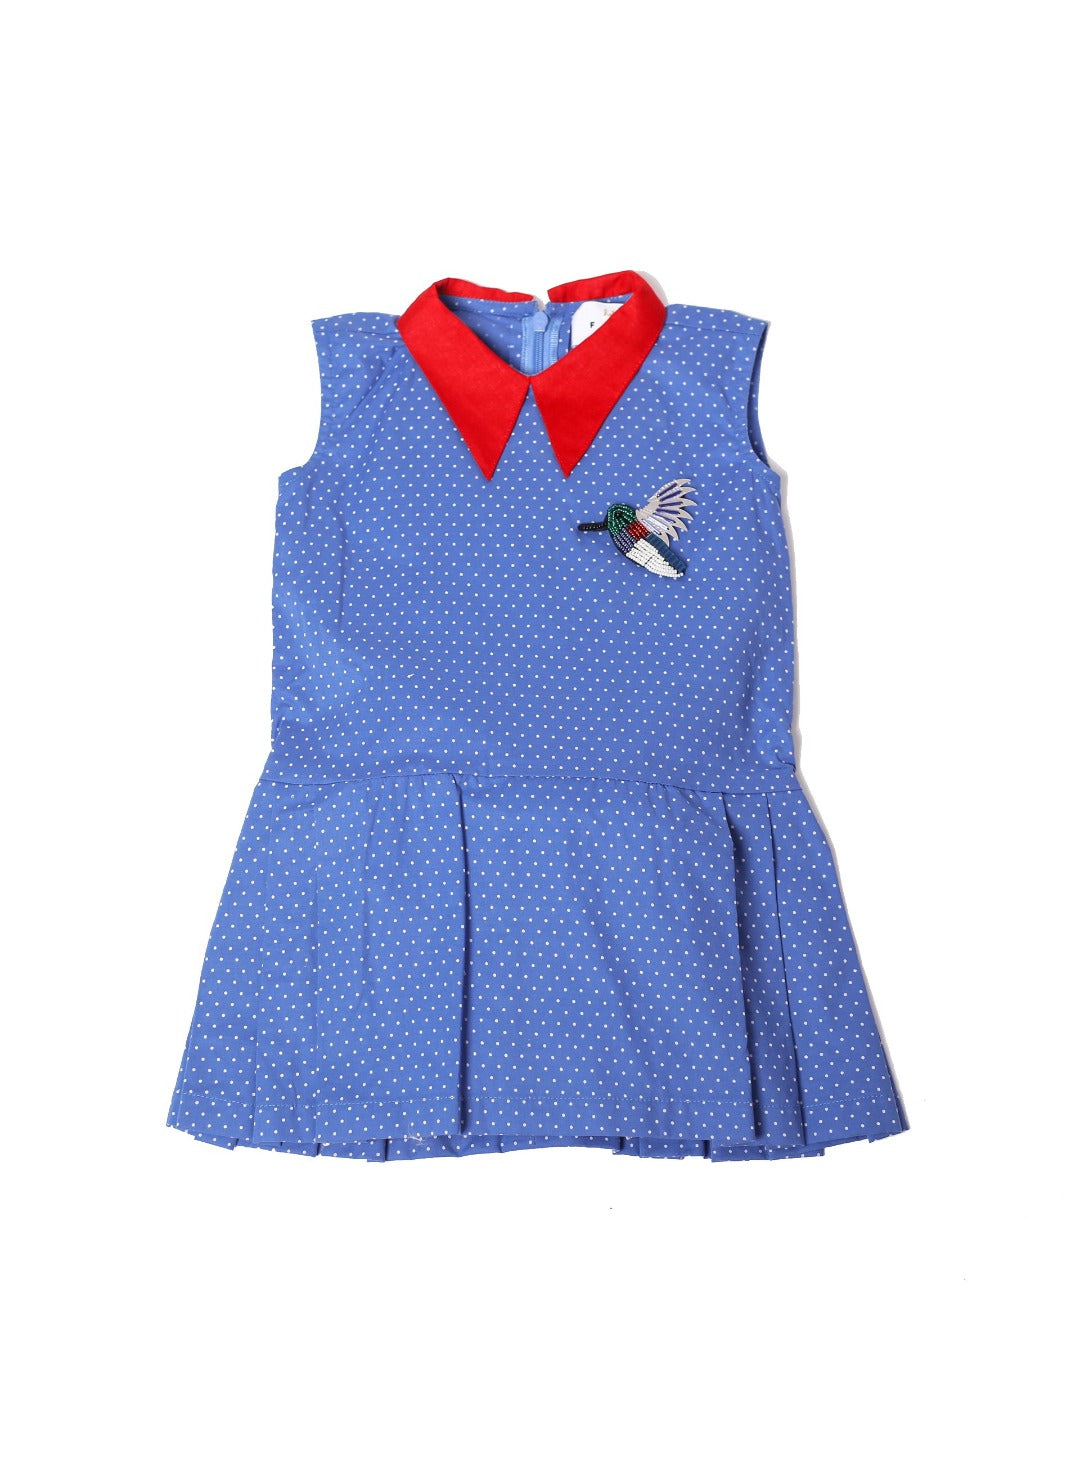 royal blue dress with contrasting red collar